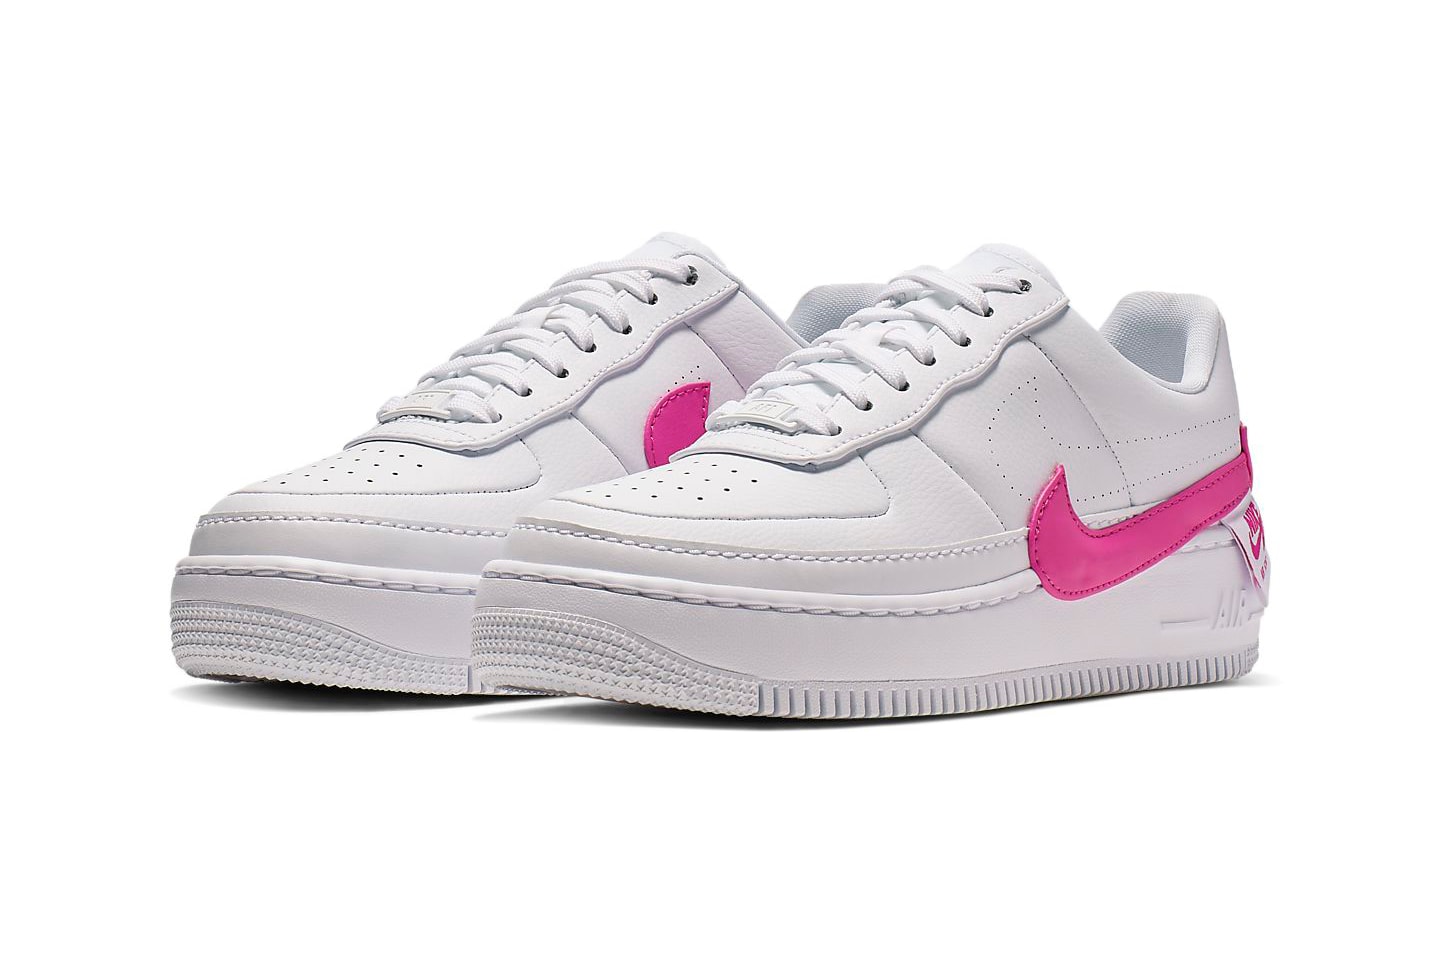 Nike Air Force 1 Jester XX Laser Fuchsia Pink Swoosh White Sneakers Trainers